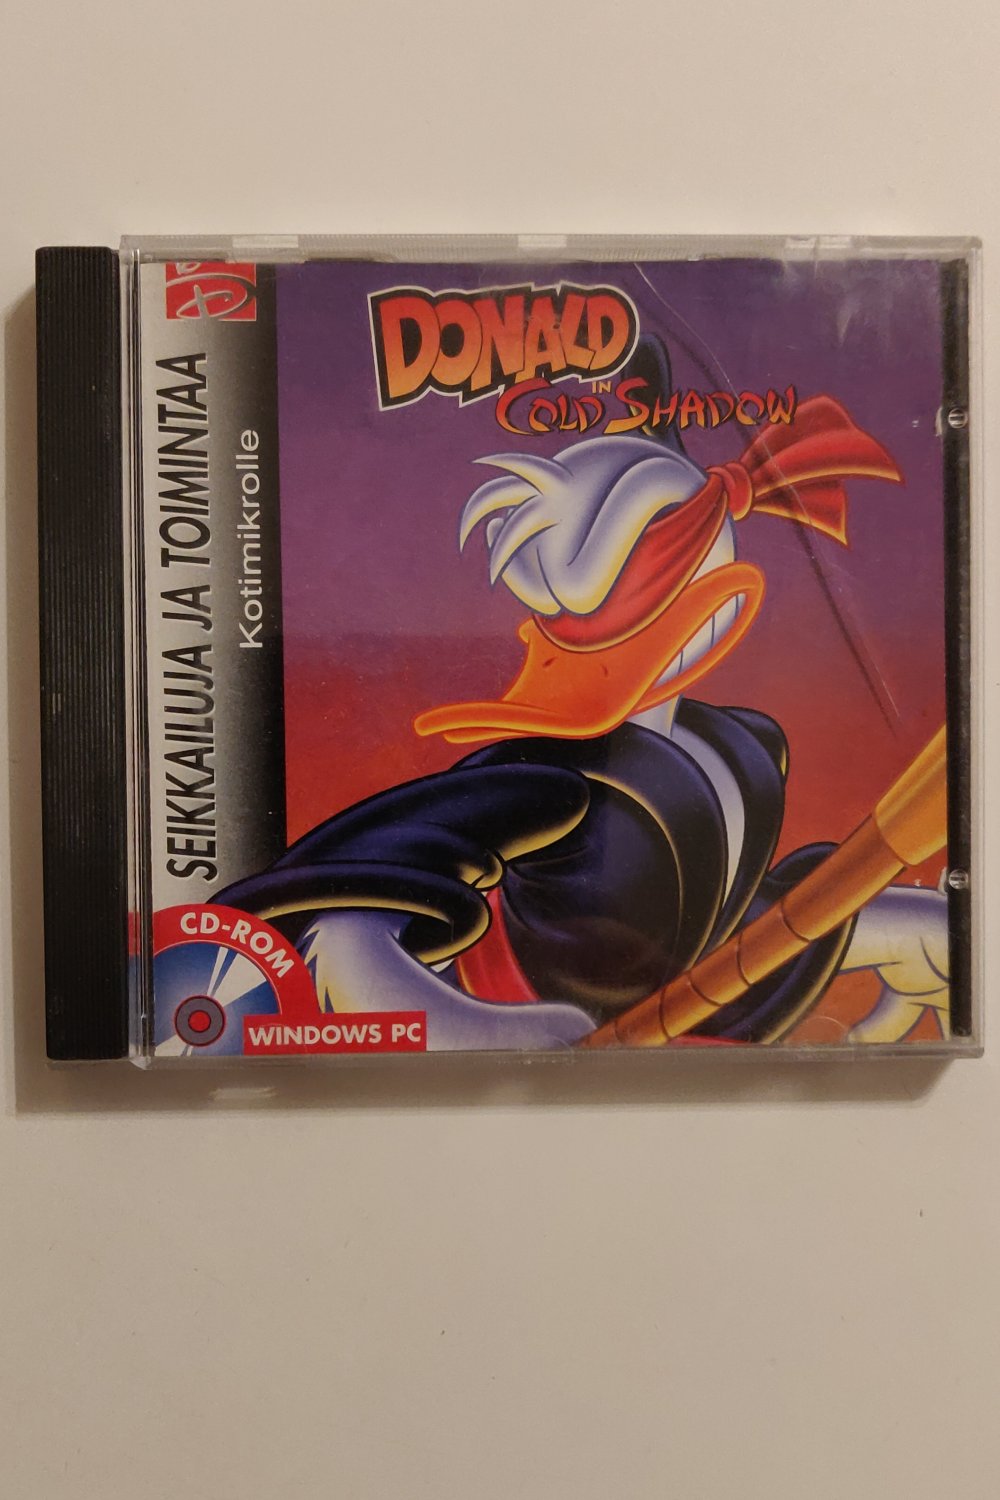 Donald in Cold Shadow (PC) (Loose)